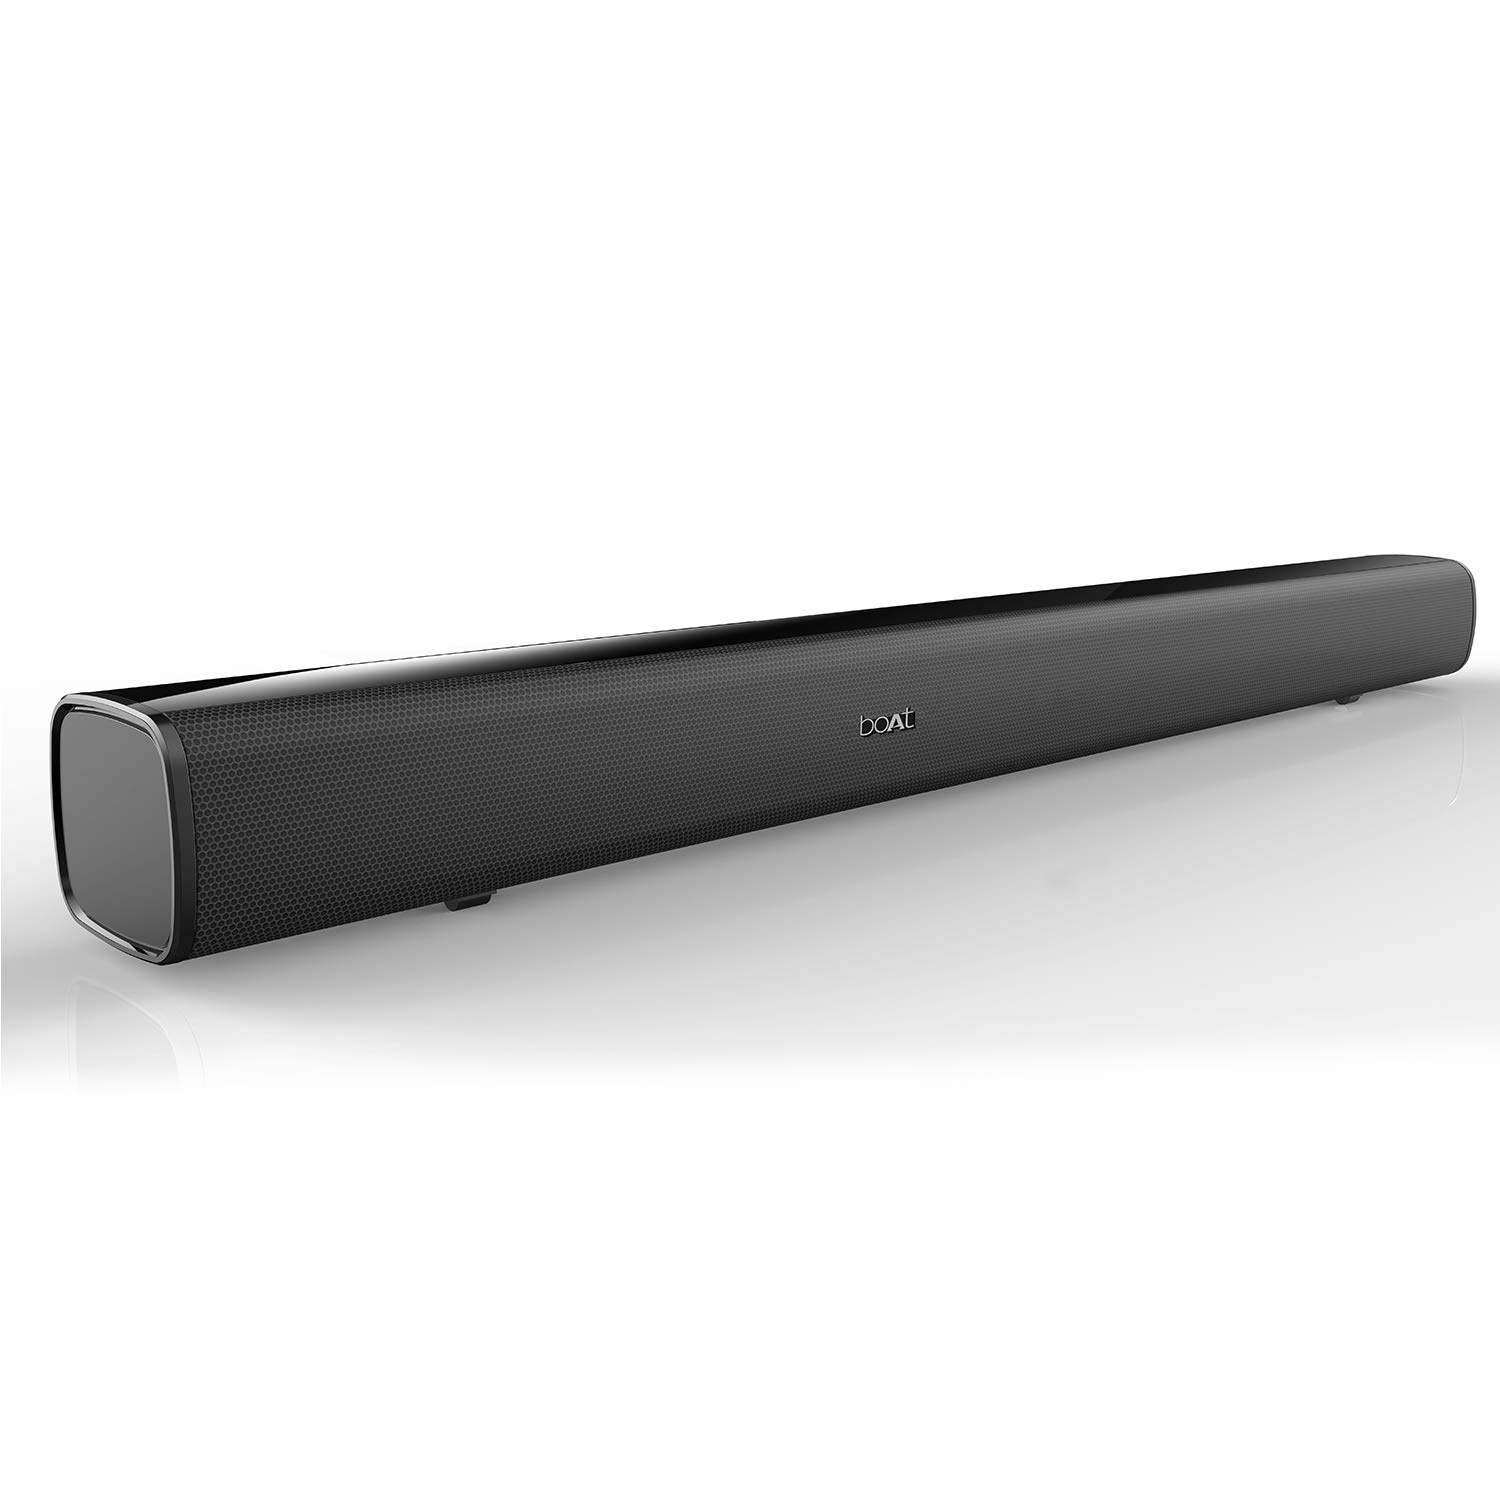 Amazon Sale: Not only Diwali, this sound bar is the life of every festival and party, buy best seller sound bar in Amazon Sale